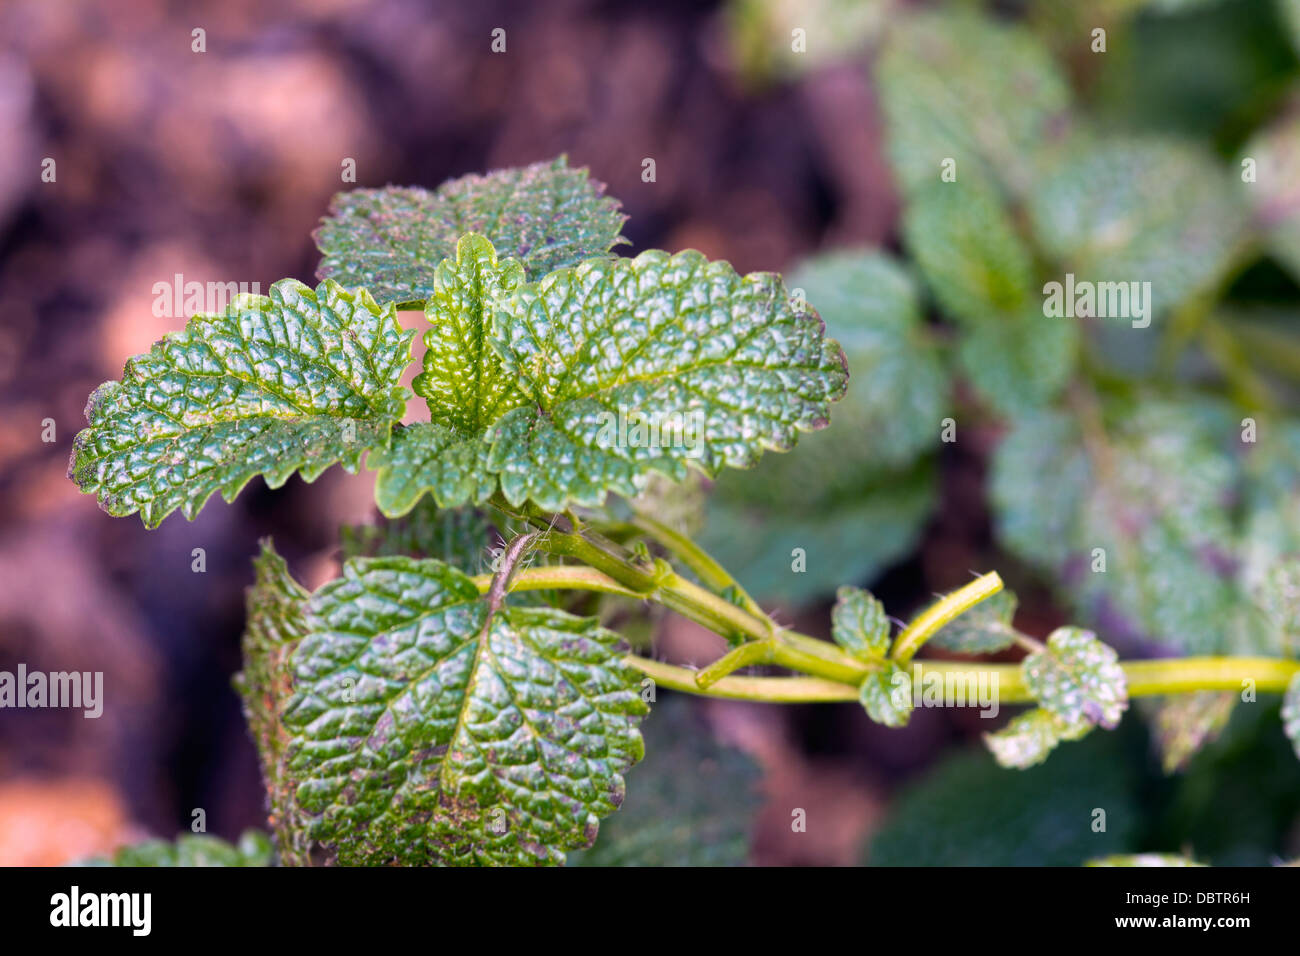 Closeup of Lemon Balm (Melissa officinalis) growing in a cultivated herb garden Stock Photo